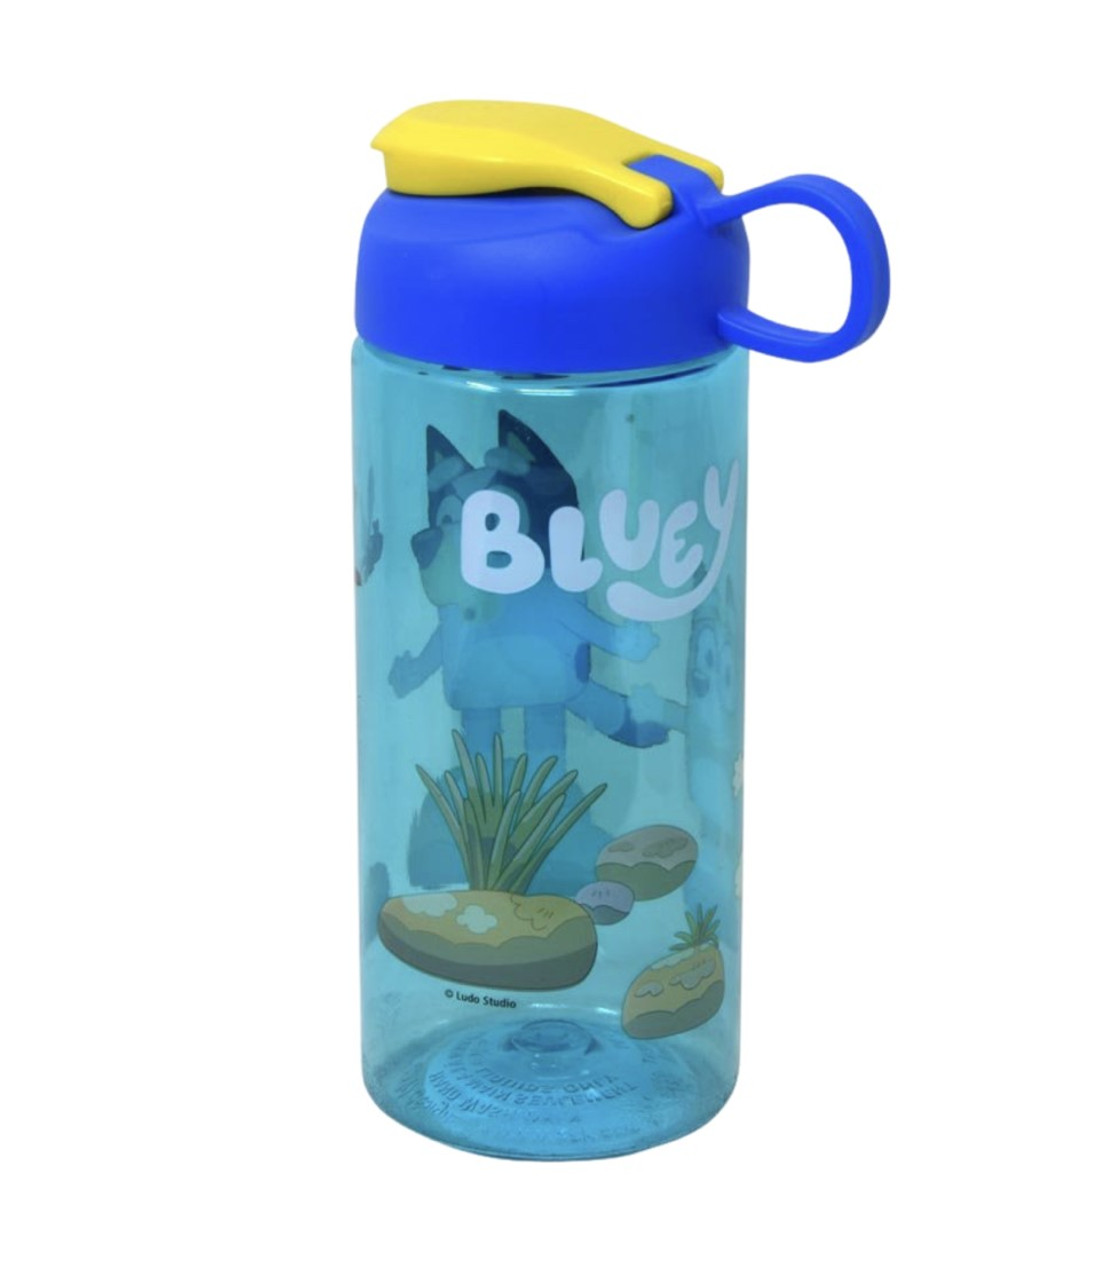 https://cdn11.bigcommerce.com/s-31ycg3ui3f/images/stencil/1280x1280/products/1949/6098/Water_Bottles_-_Bluey_3__12772.1690728142.jpg?c=1?imbypass=on